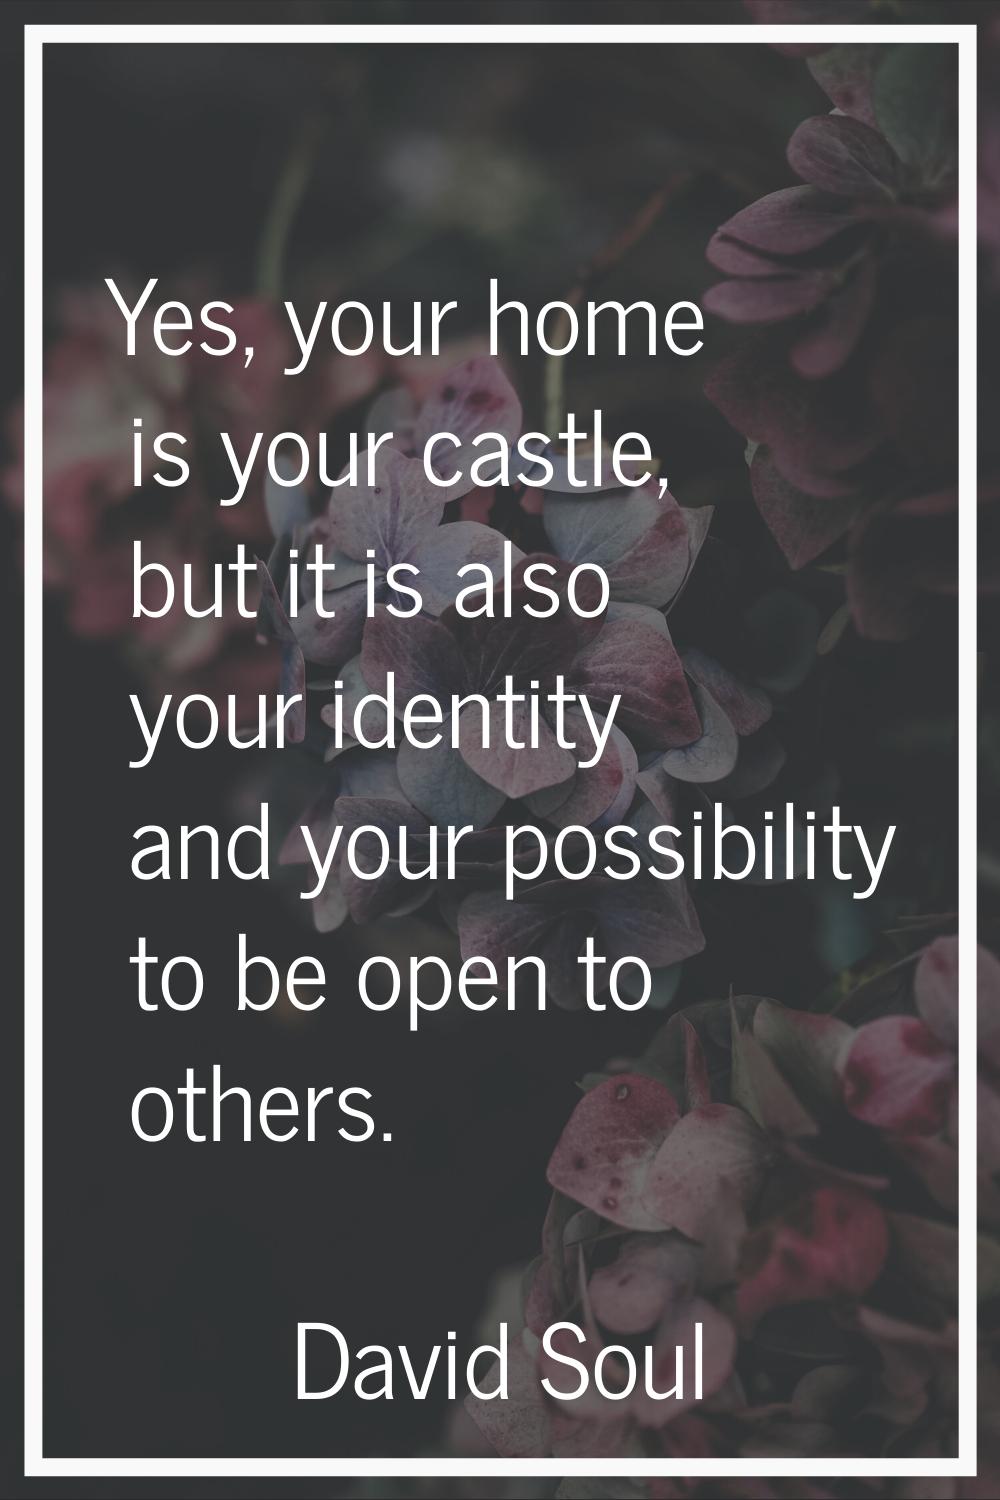 Yes, your home is your castle, but it is also your identity and your possibility to be open to othe